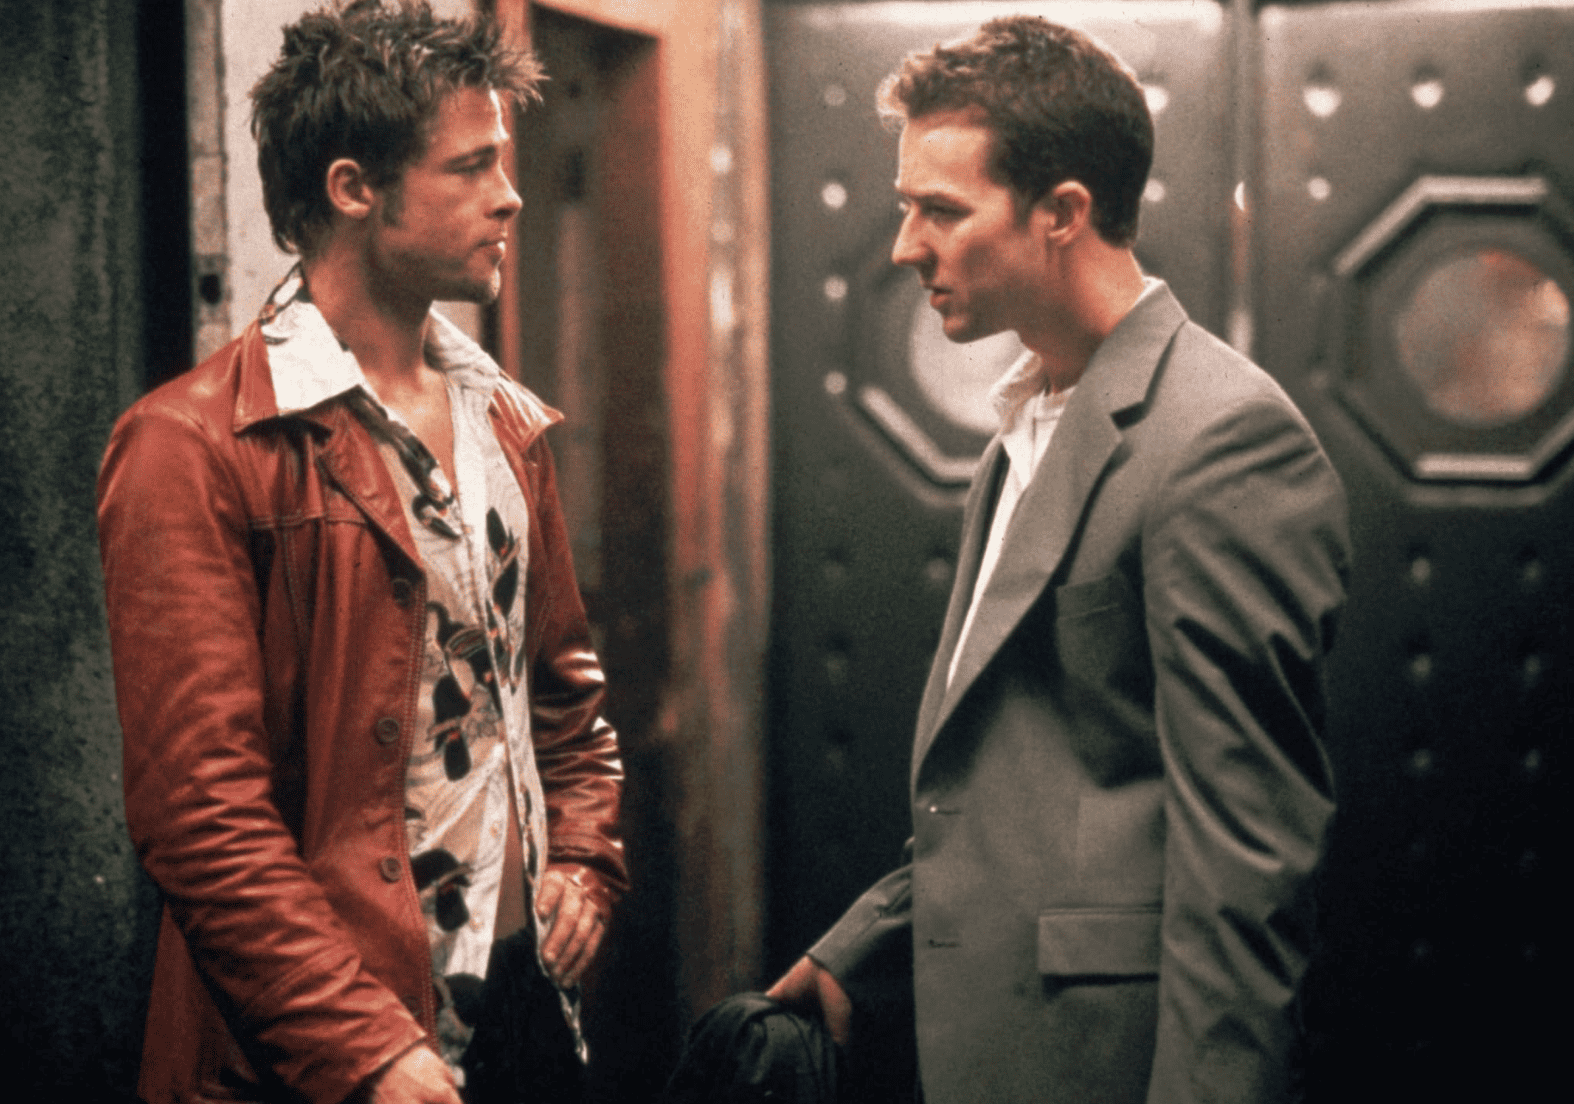 Two men talk in a hallway in this image from Fox 2000 Pictures.